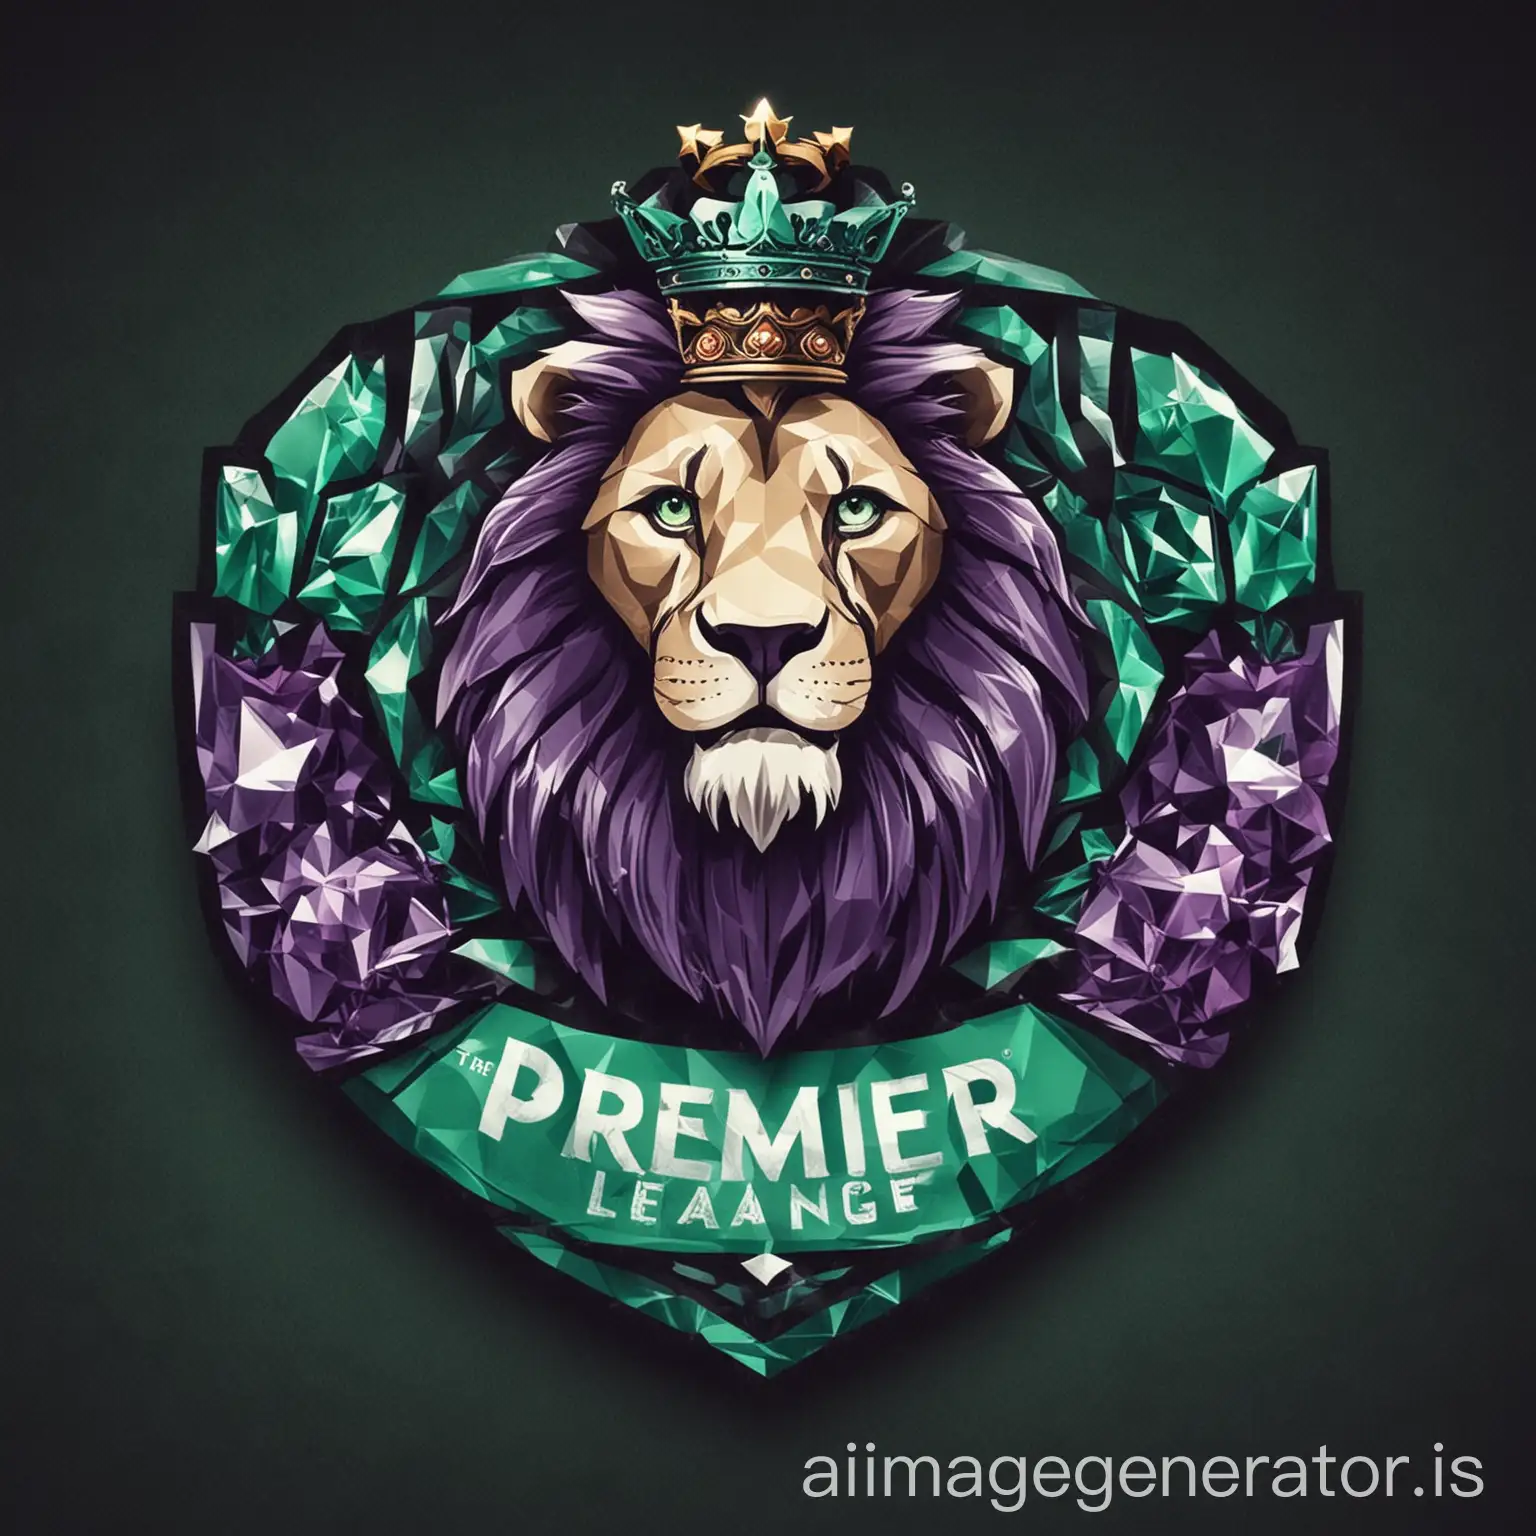 The Premier League Logo With Emerald and Amethyst Theme with the lion